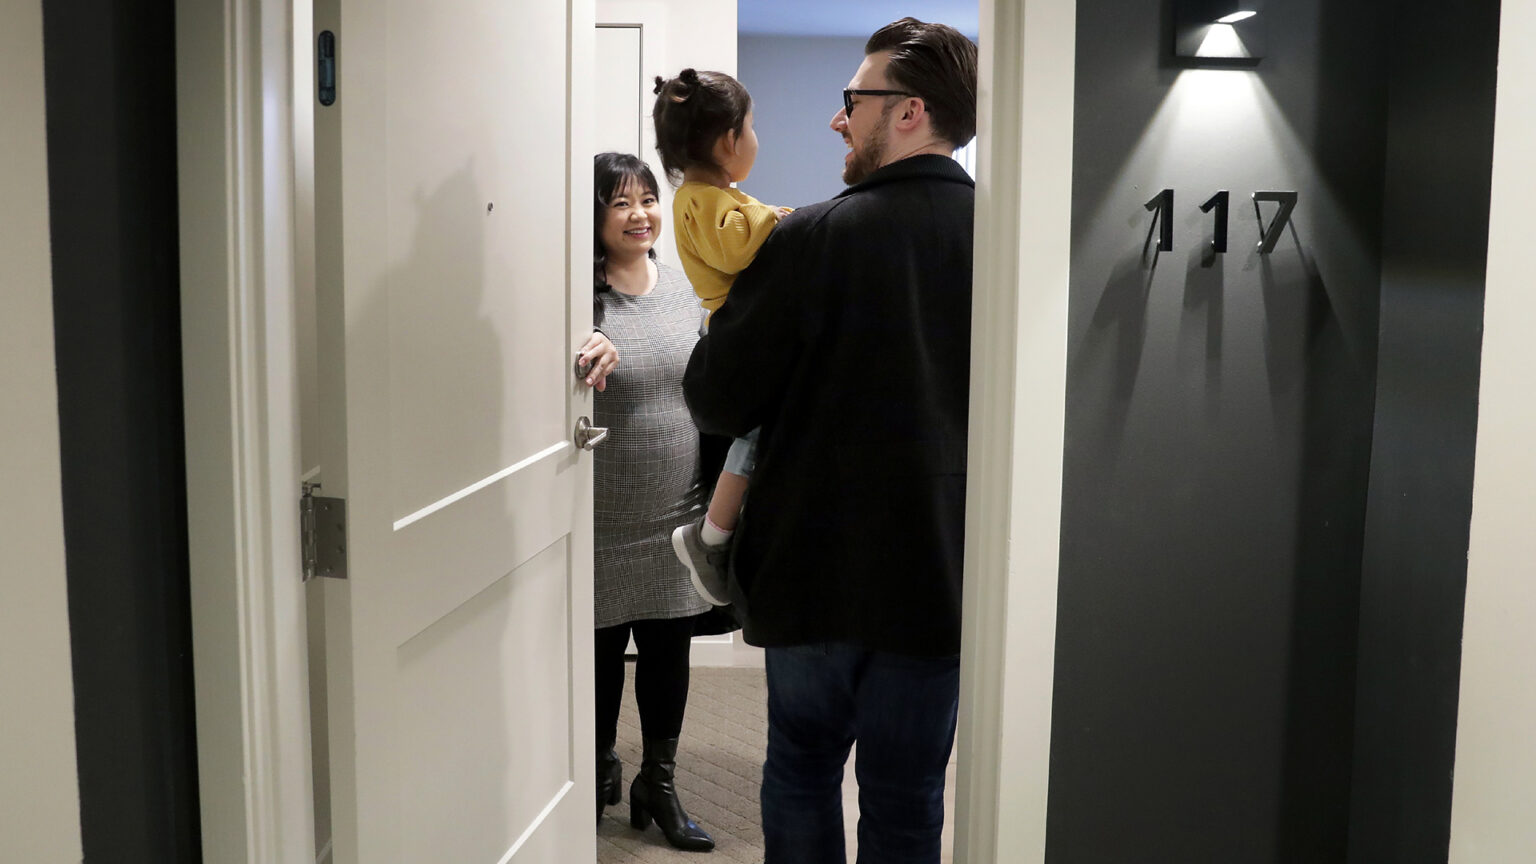 Sheng Lee Riechers stands inside a door to an apartment, facing Karl Riechers, who is holding their daughter.